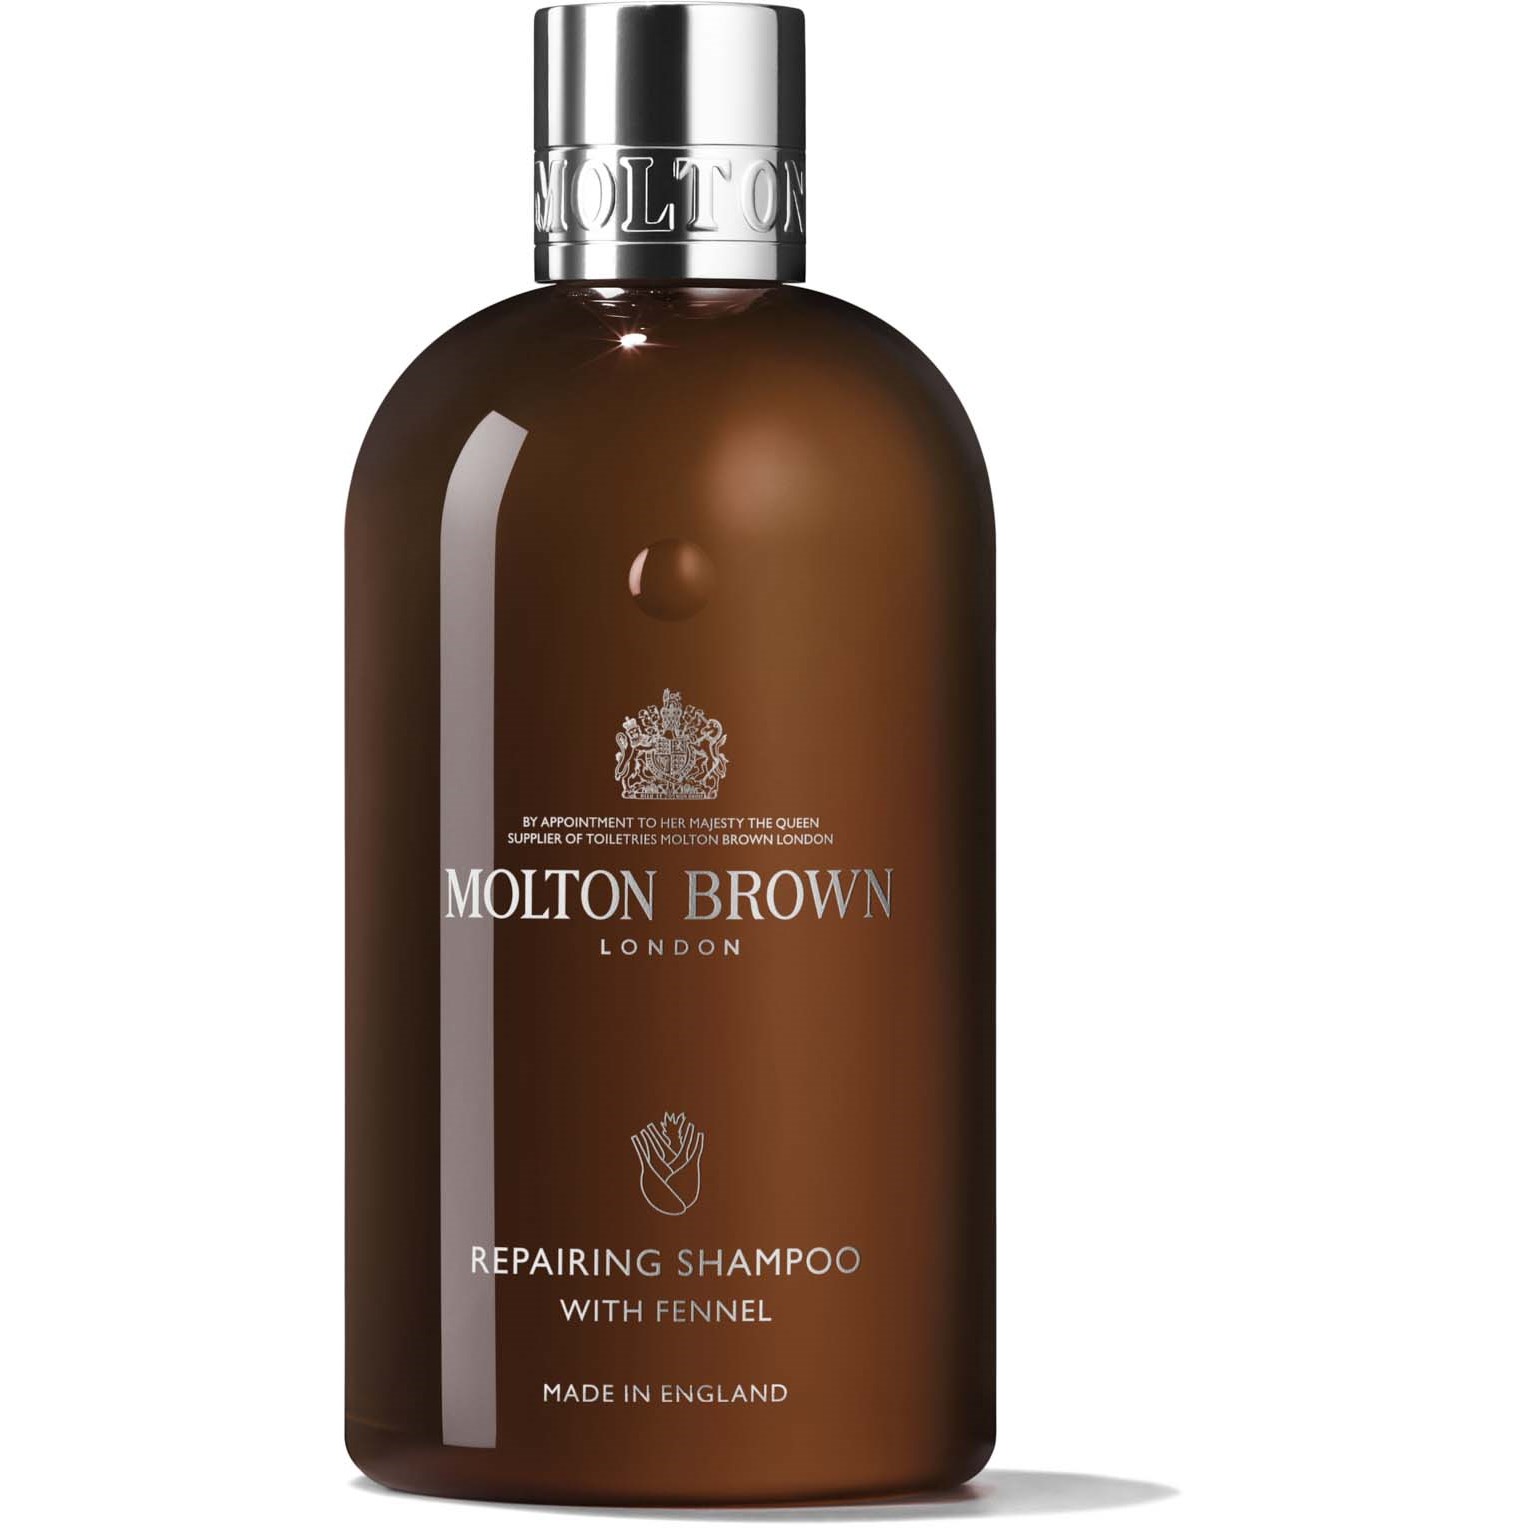 Molton Brown Repairing Shampoo with Fennel 300 ml